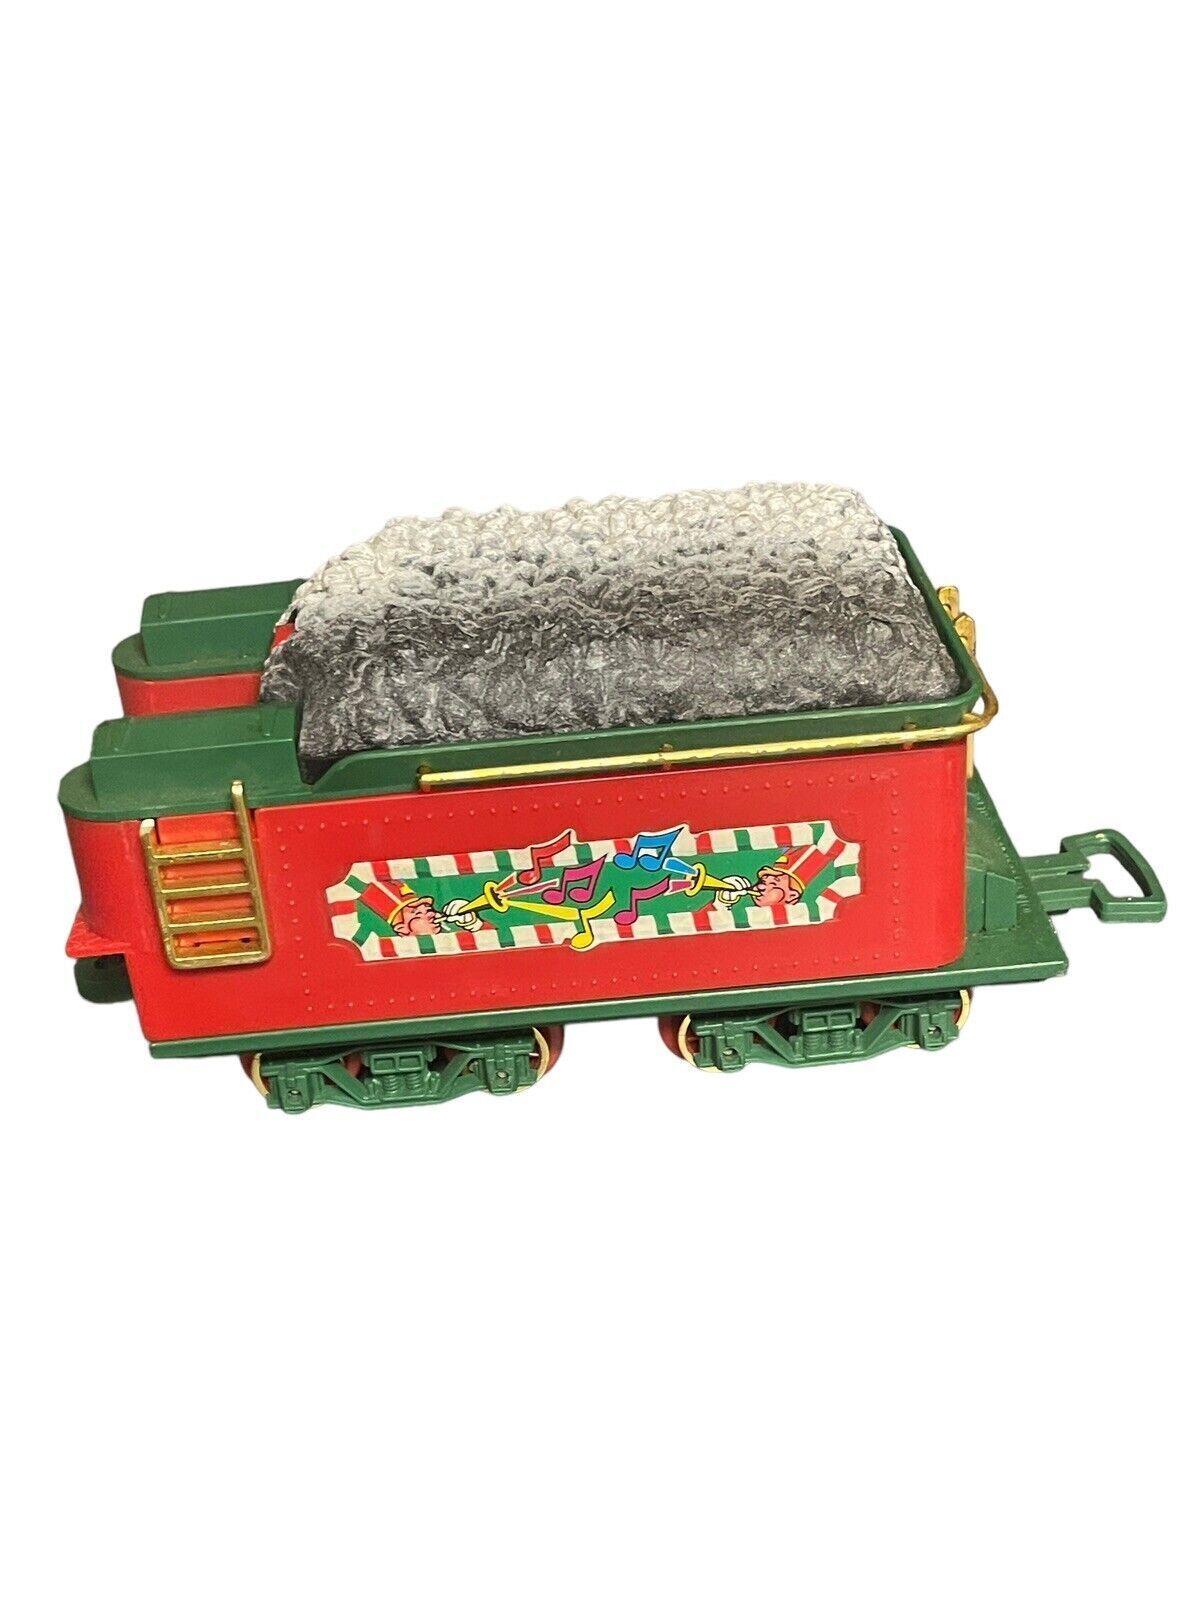 New Bright 1986 Christmas Express Coal Car Train Tender G Scale Vintage